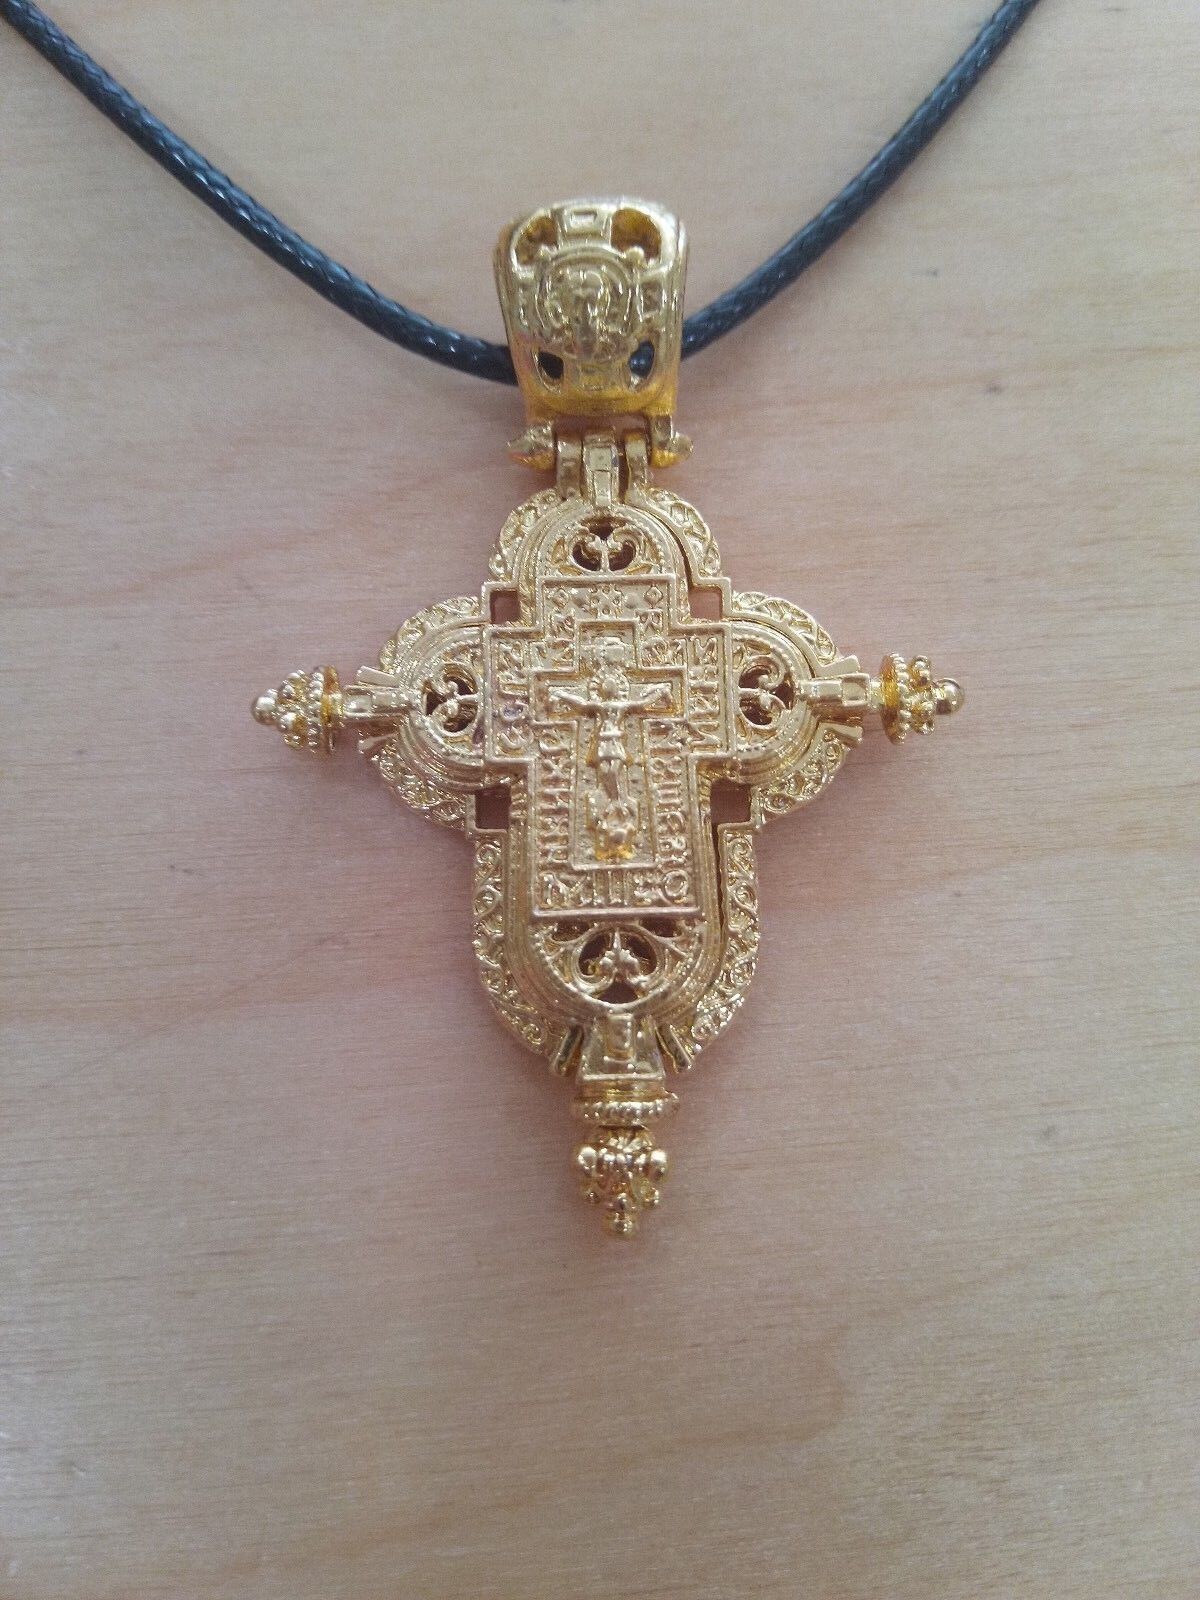 Russian Style Orthodox Christian Reliquary Pectoral Cross Good Detail Relic Case